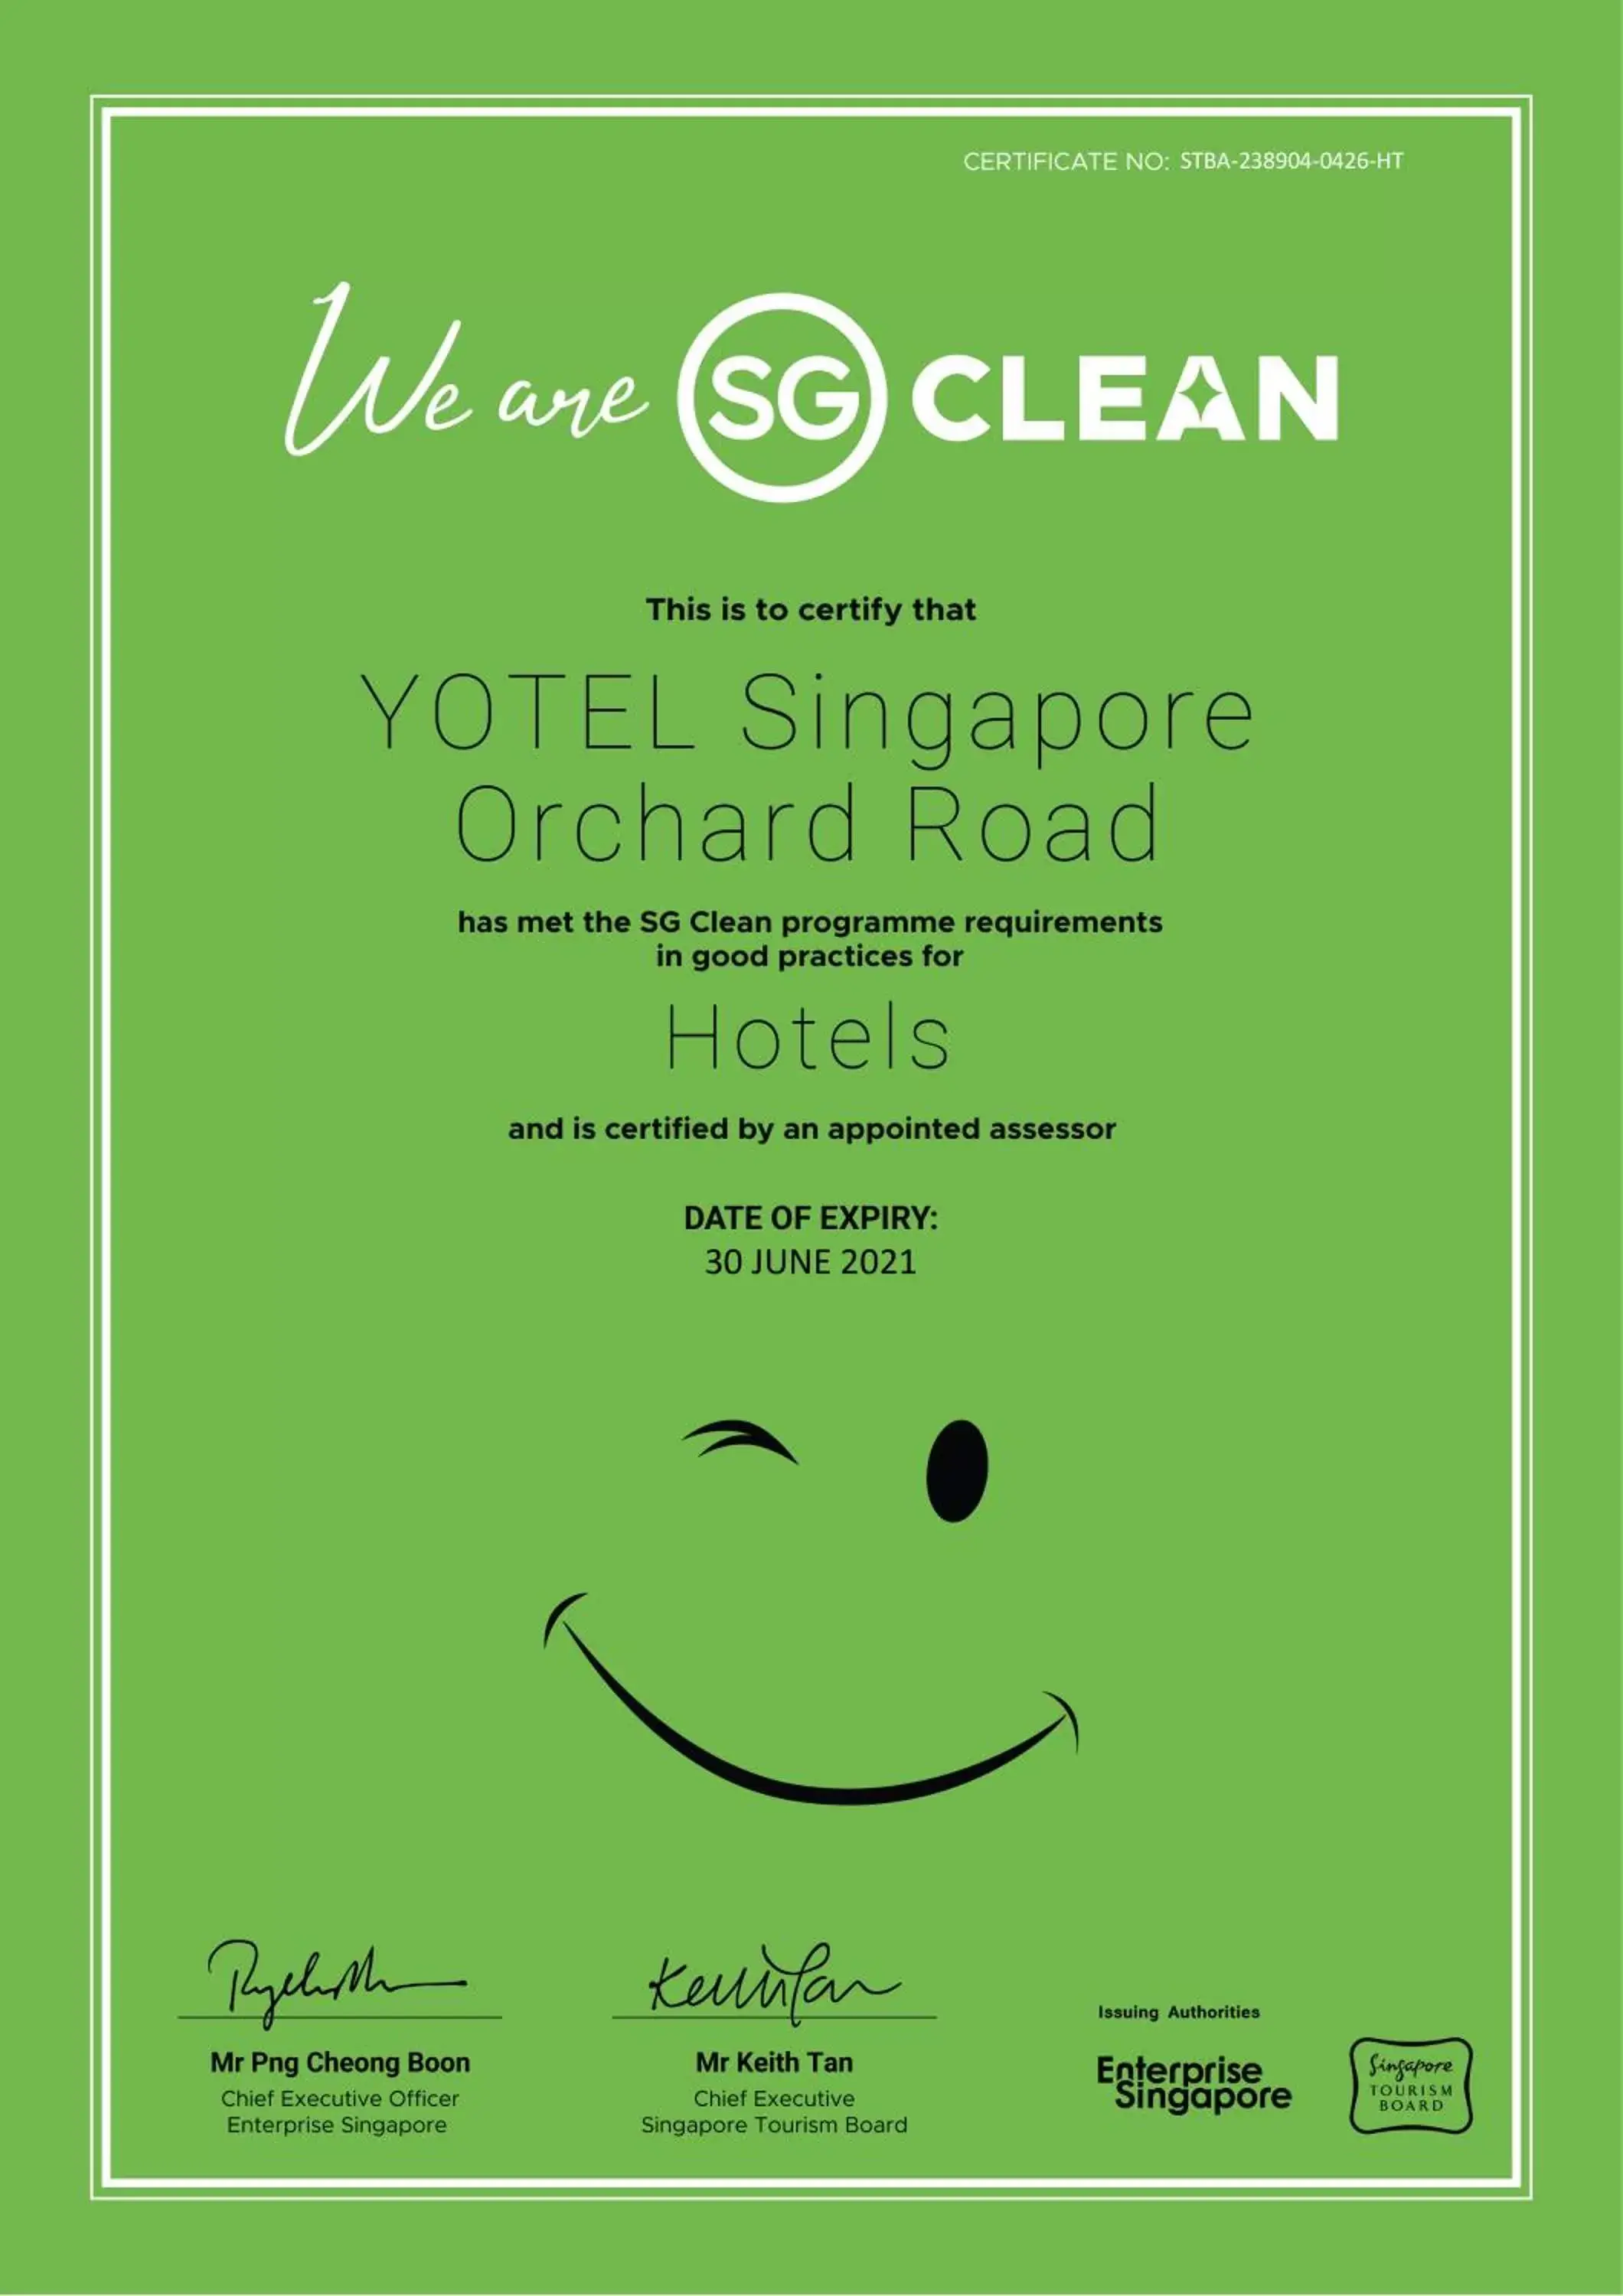 Certificate/Award in YOTEL Singapore Orchard Road